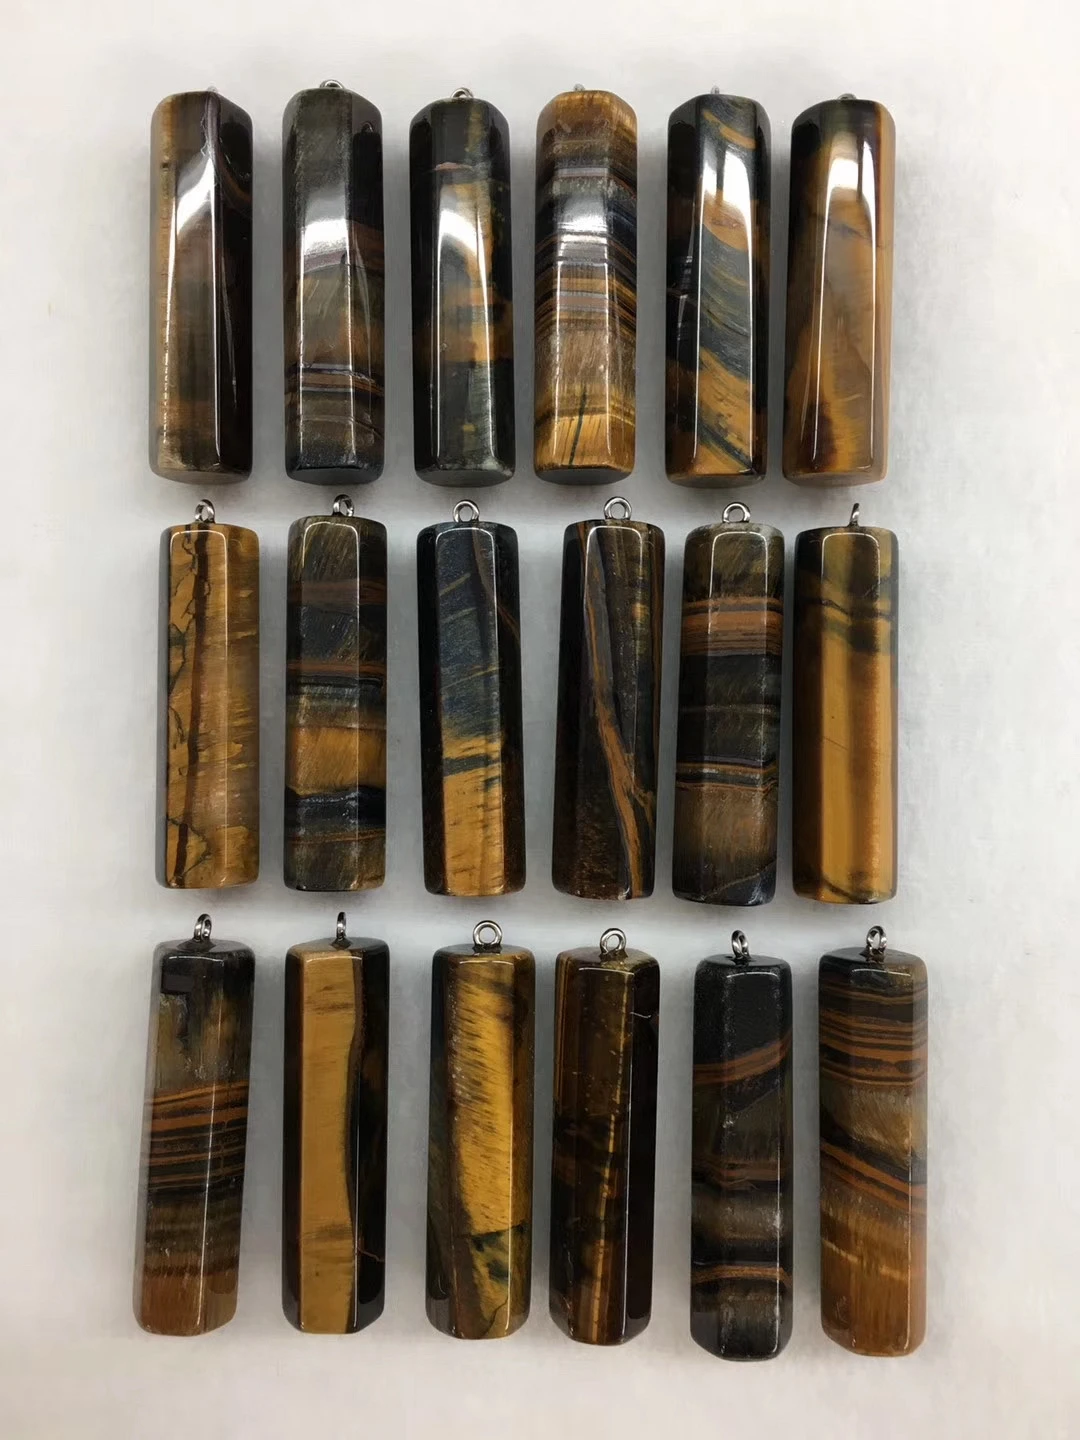 

Promotion! 10pcs/Pack Natural Tiger Eye Bead Pendant,13x50mm Tubes Pendant for Jewelry Necklace DIY